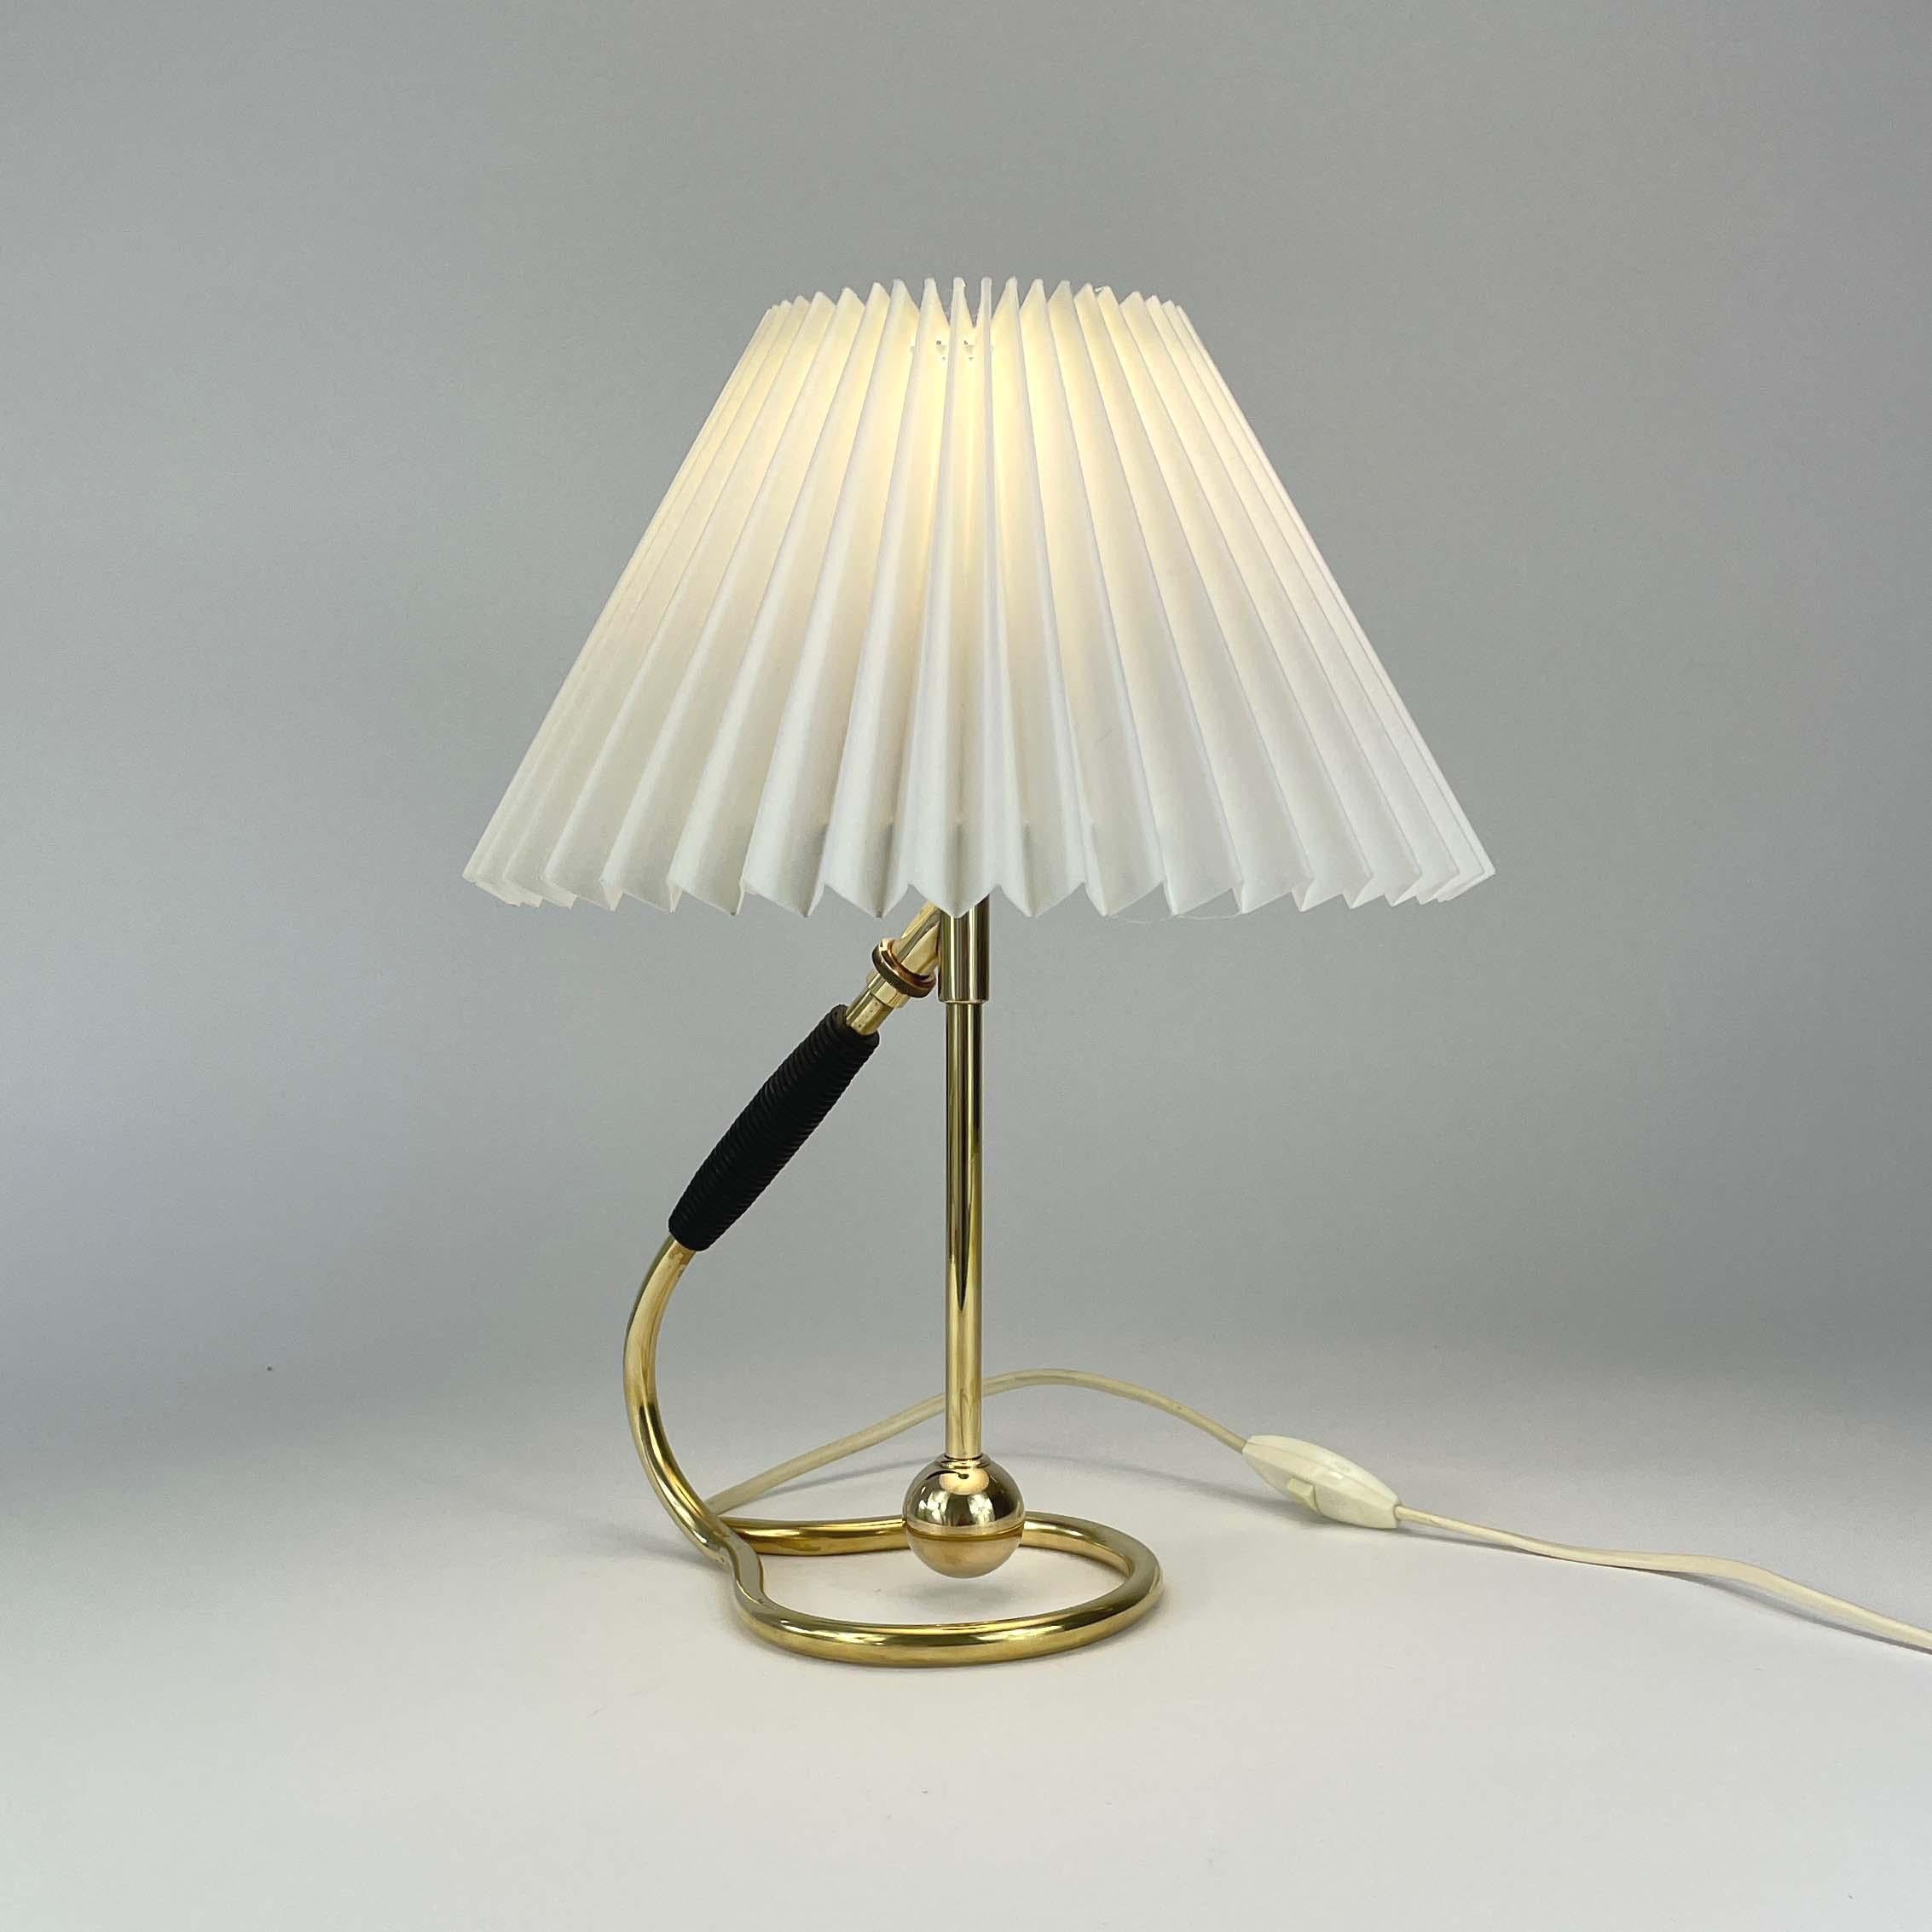 Adjustable Brass and Bakelite Wall and Table Lamp 306 by Kaare Klint, 1950s For Sale 6